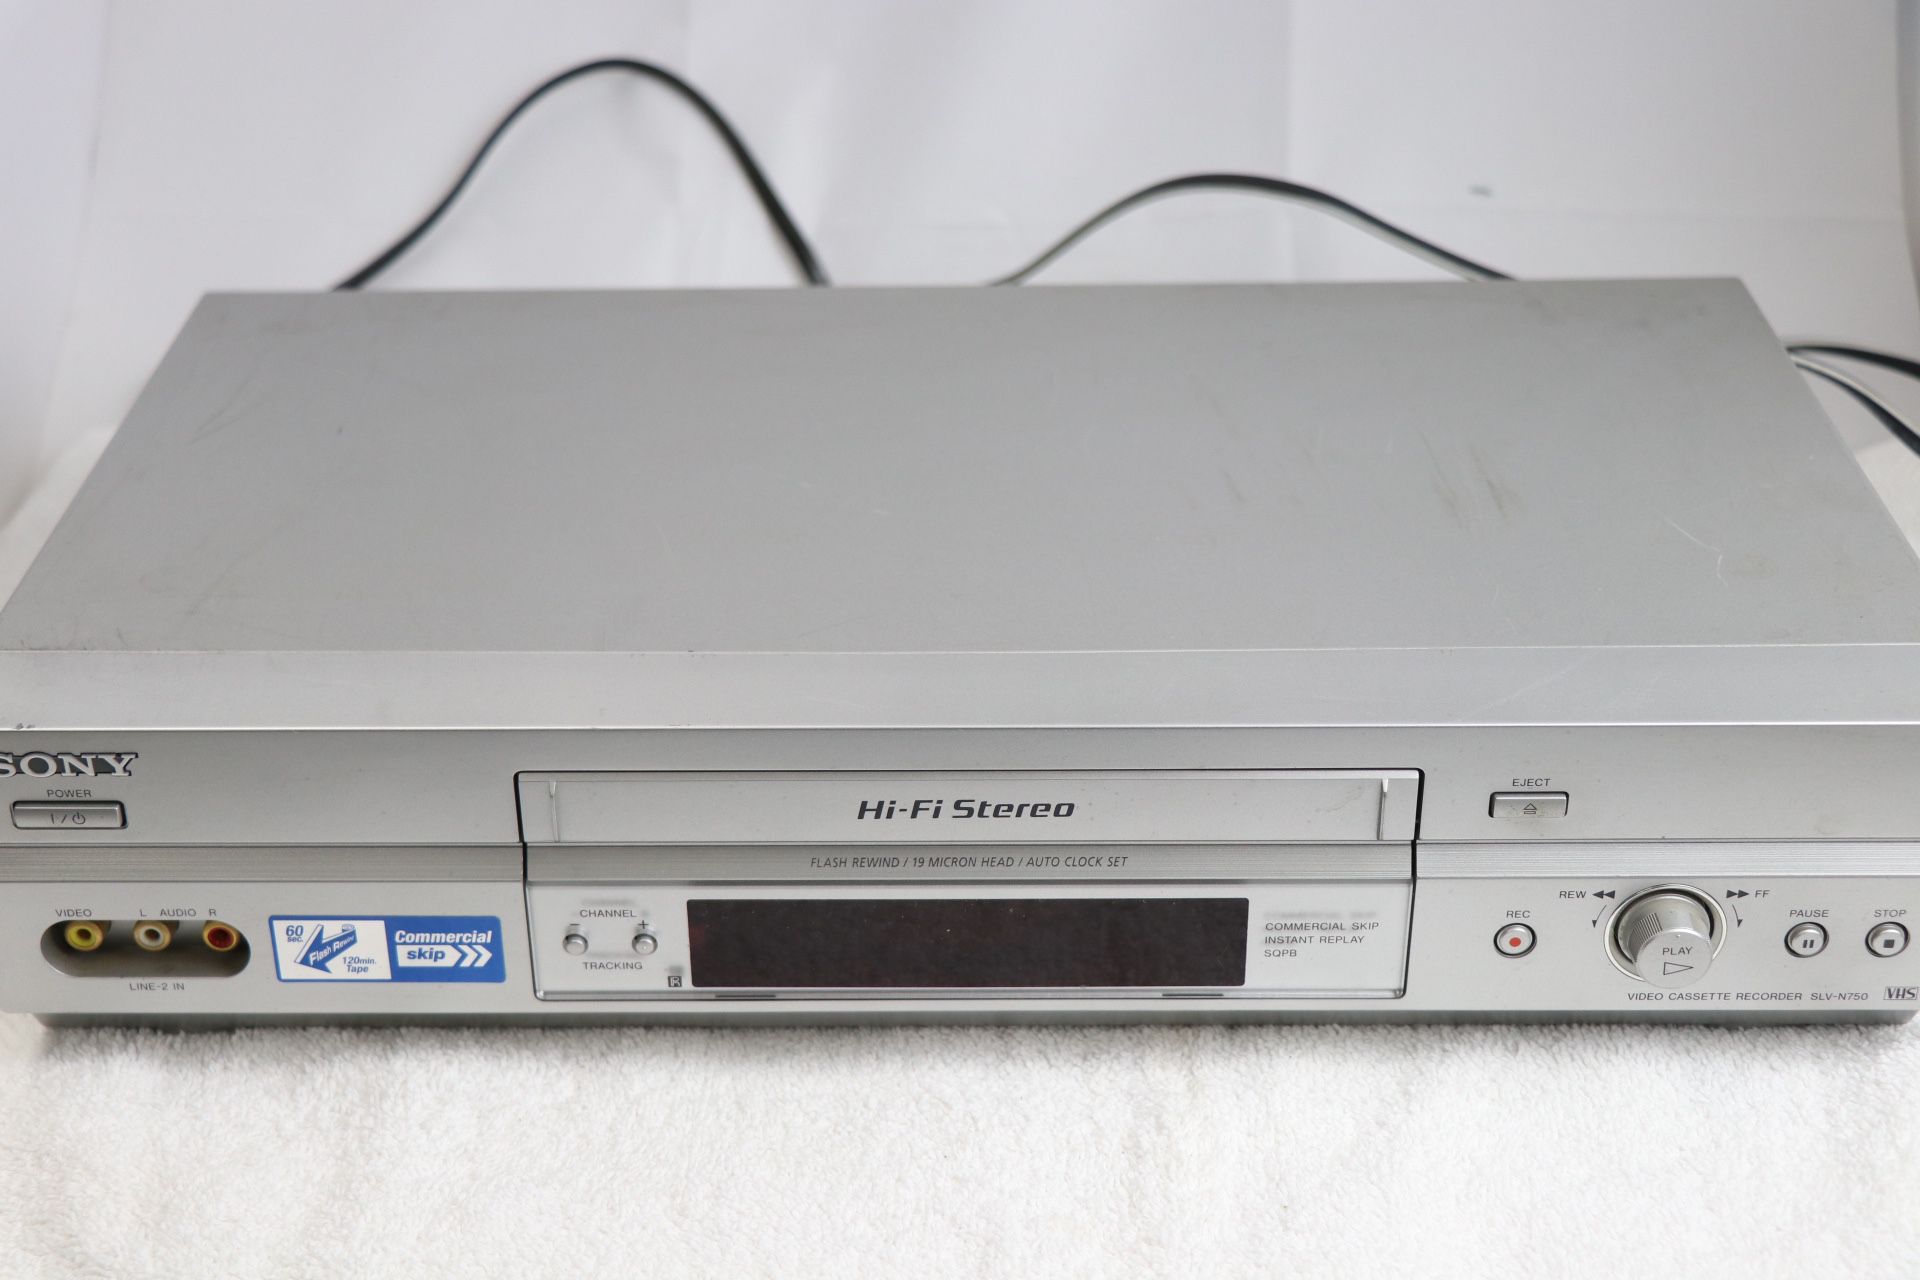 Sony SLV-N750 VCR VHS Player 4 Head Hi-Fi Stereo Recorder TESTED!!